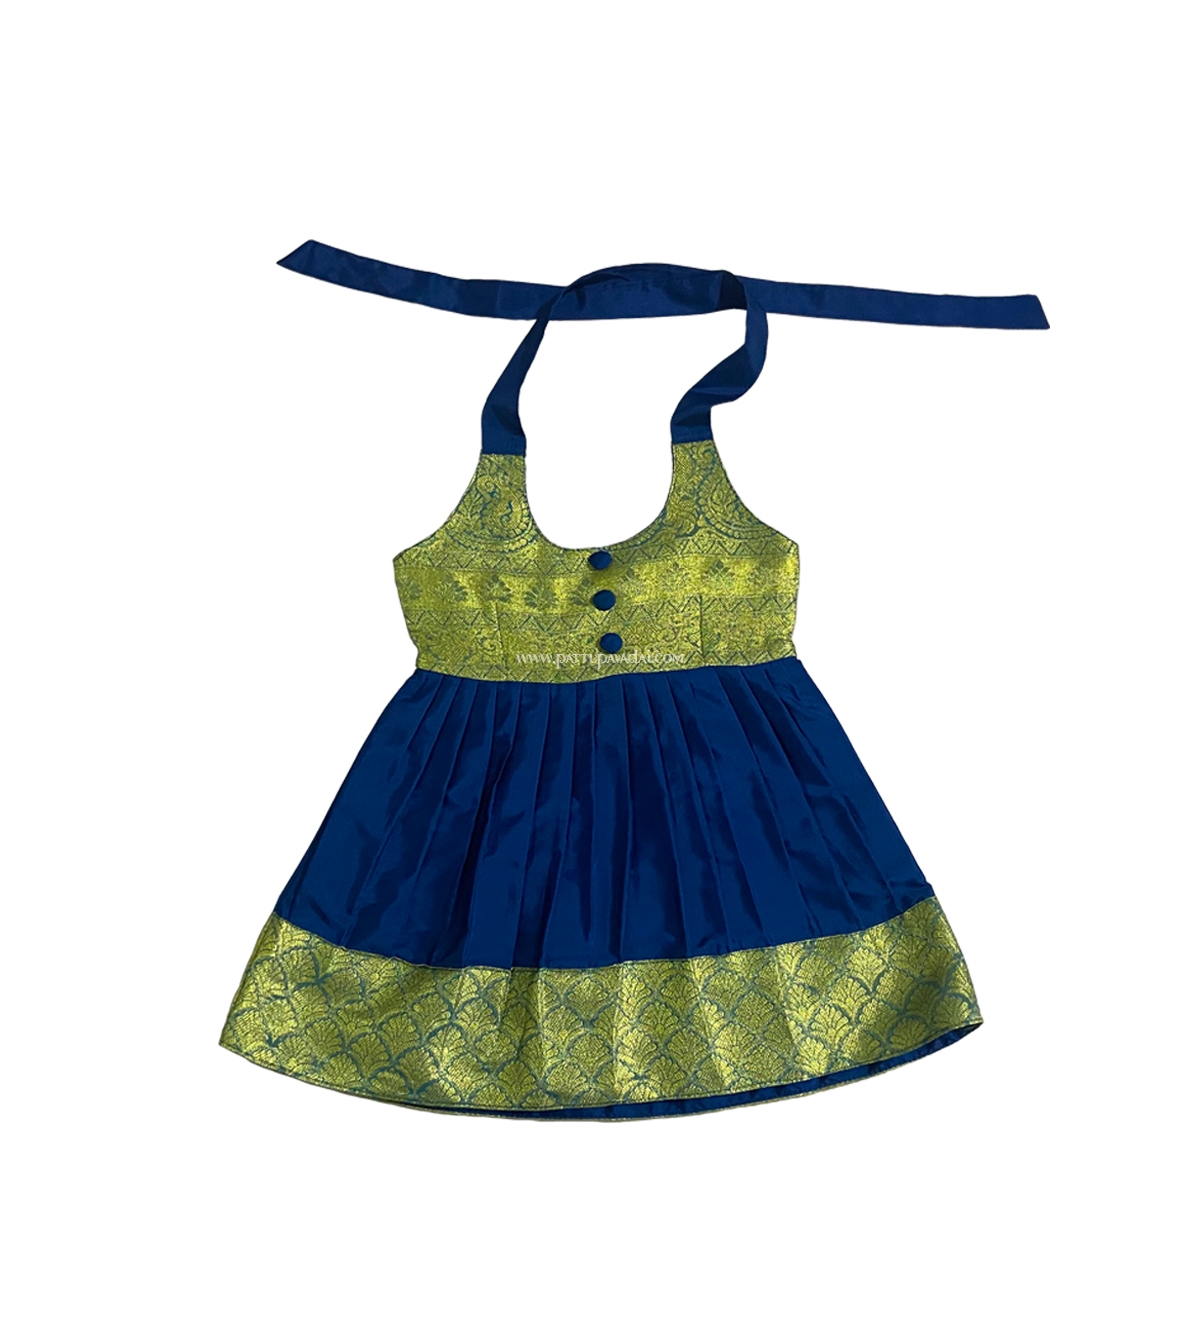 Buy Online Just Born Silk Frock Peacock Blue at Best Prices